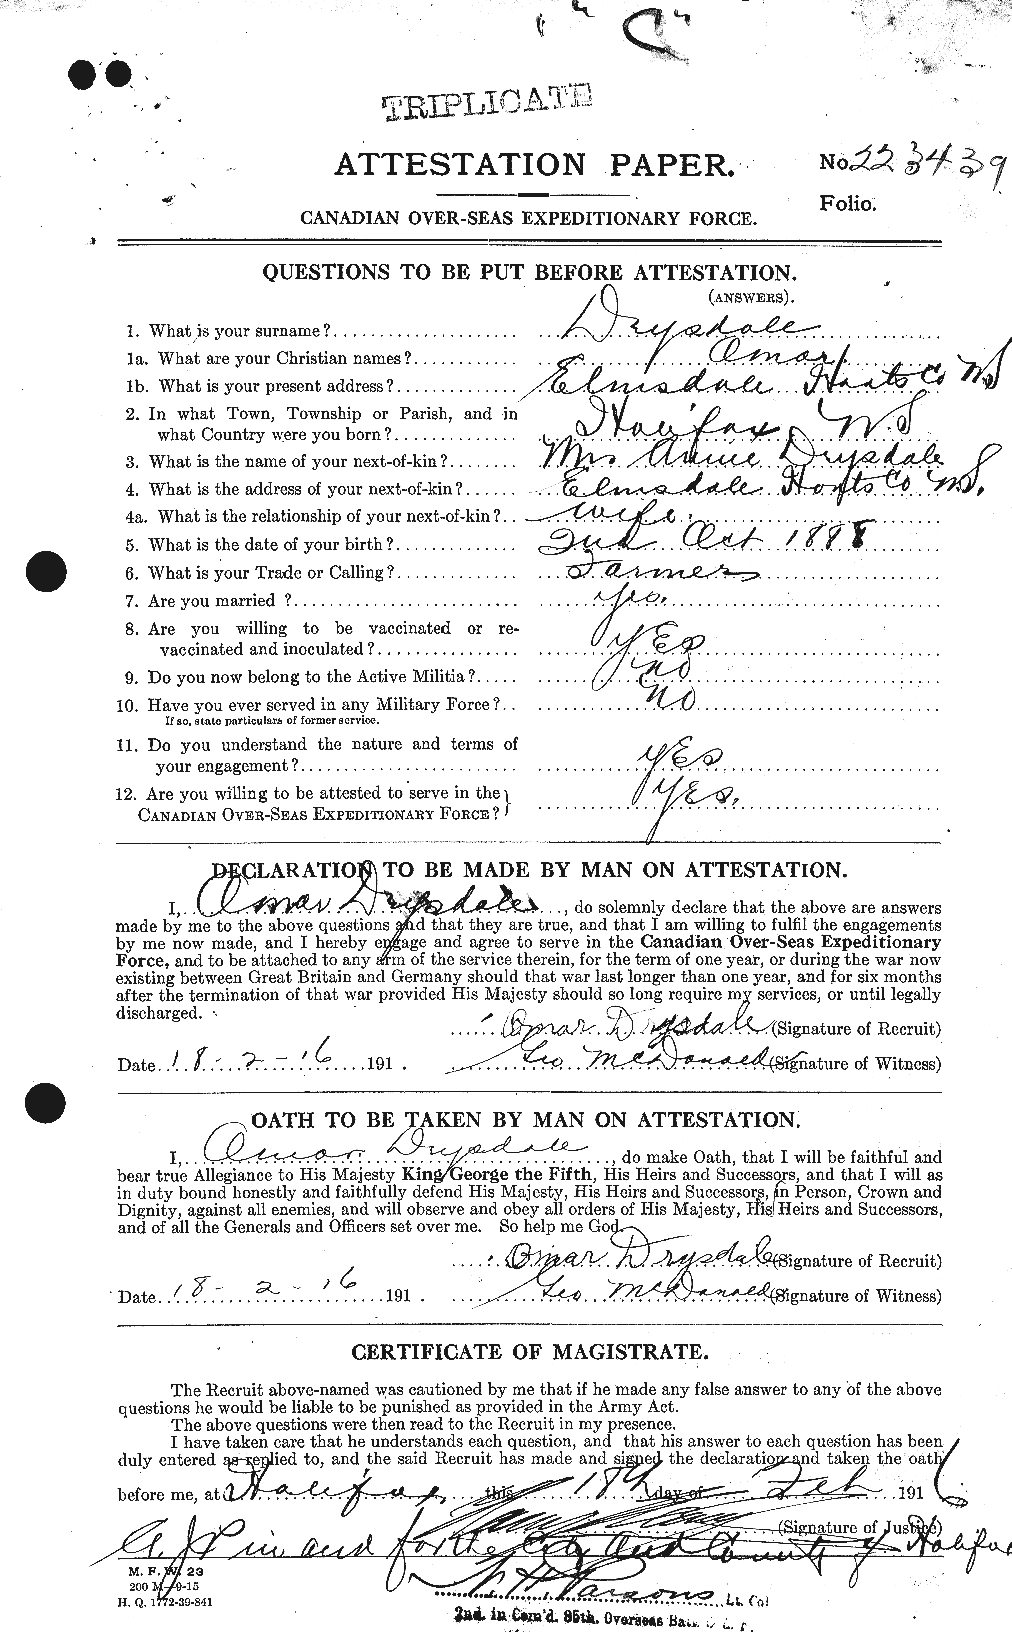 Personnel Records of the First World War - CEF 303193a